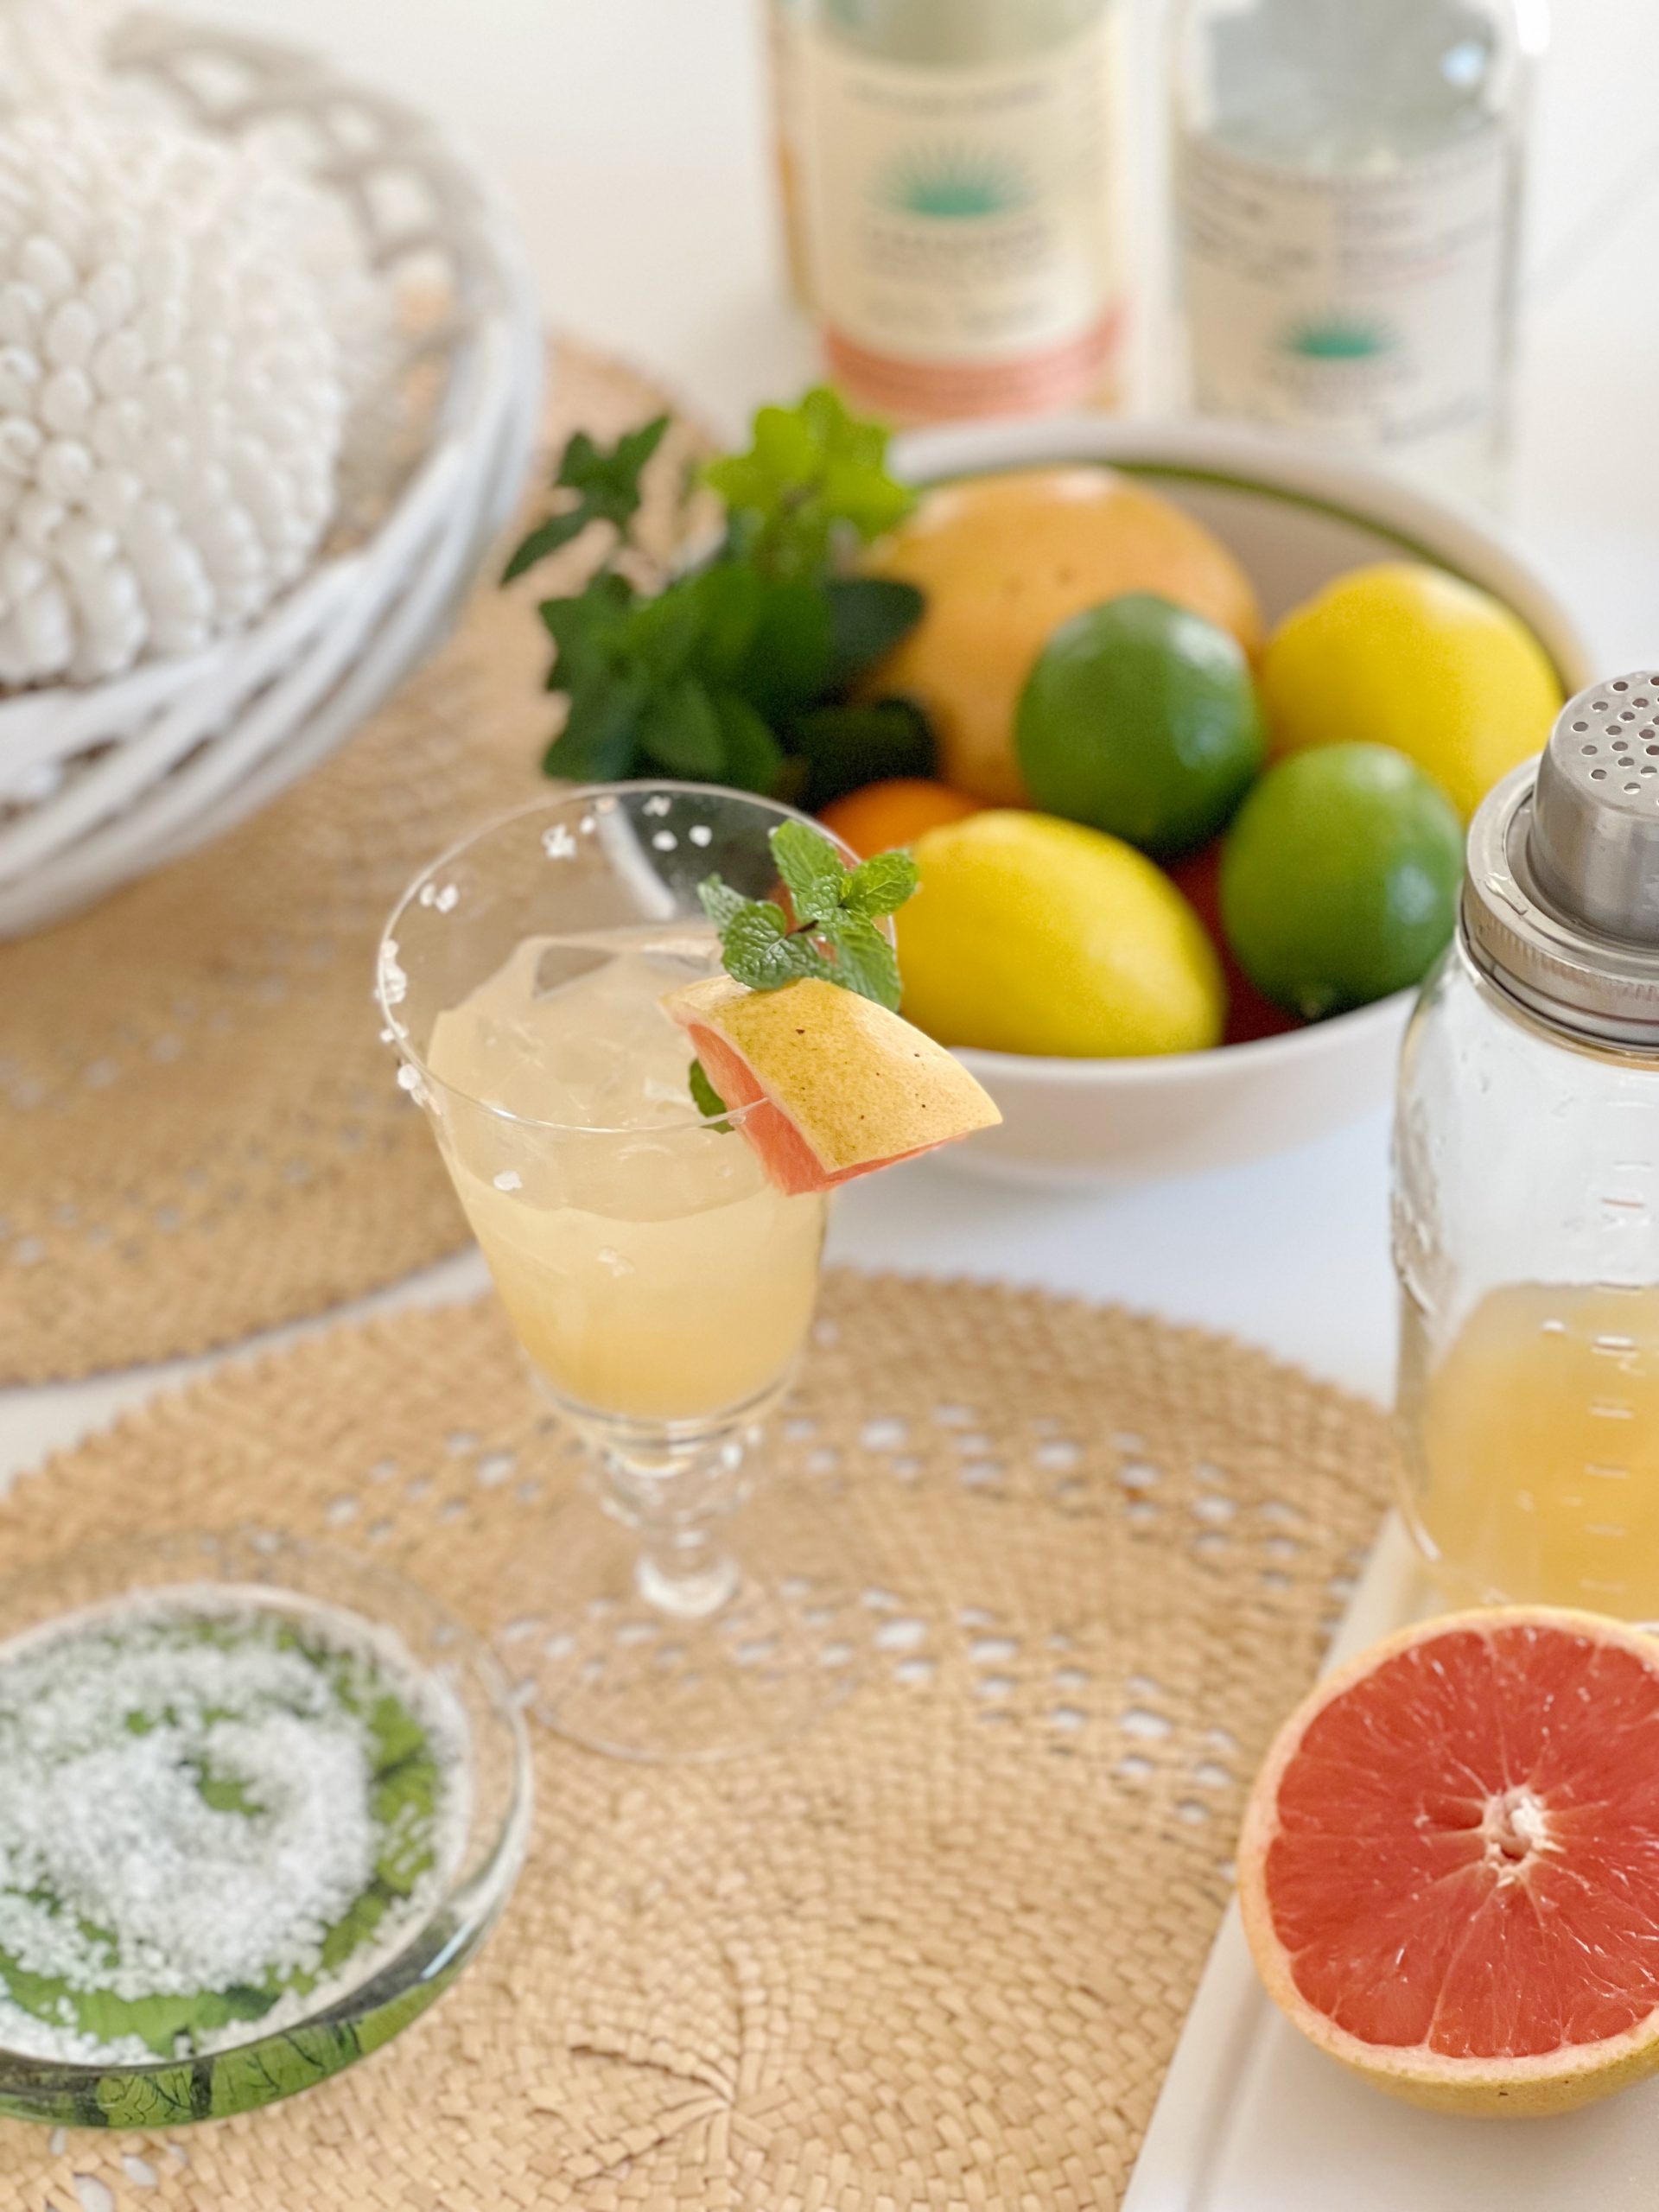 Casamigos Cocktail Mixers make entertaining easy and delicious. Just add tequila, ice and some fresh fruit to garnish!